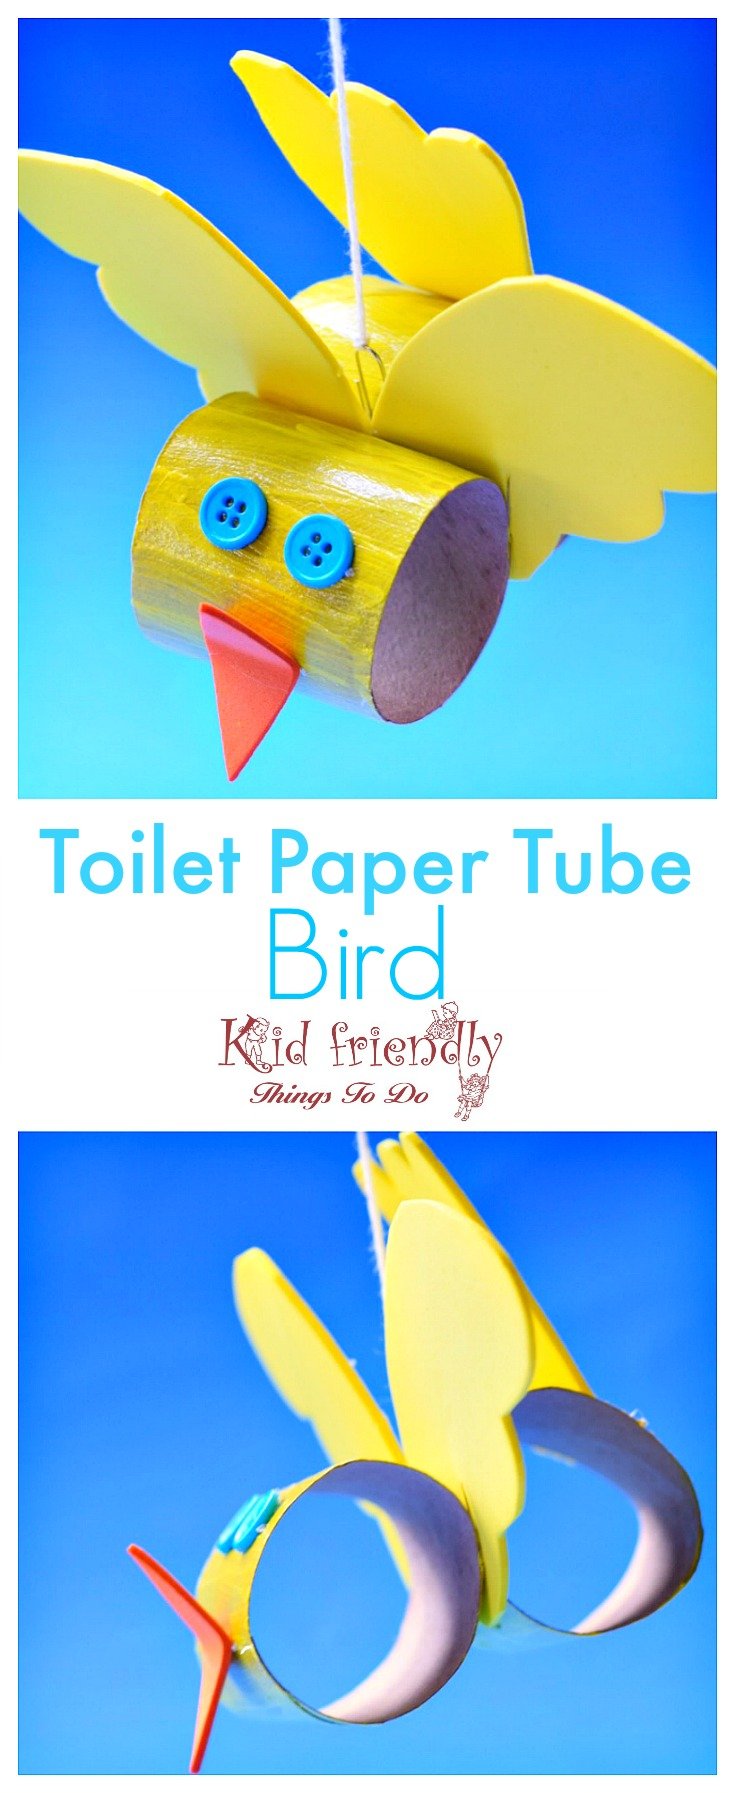 Make a Cute Toilet Paper Tube Bird Craft with Kids - Easy to Make - What a cute craft for spring and summer. Make with preschool or older kids! Hang up for a sweet decoration. Make a Cute Toilet Paper Tube Bird Craft with Kids - Easy to Make - www.kidfriendlythingstodo.com